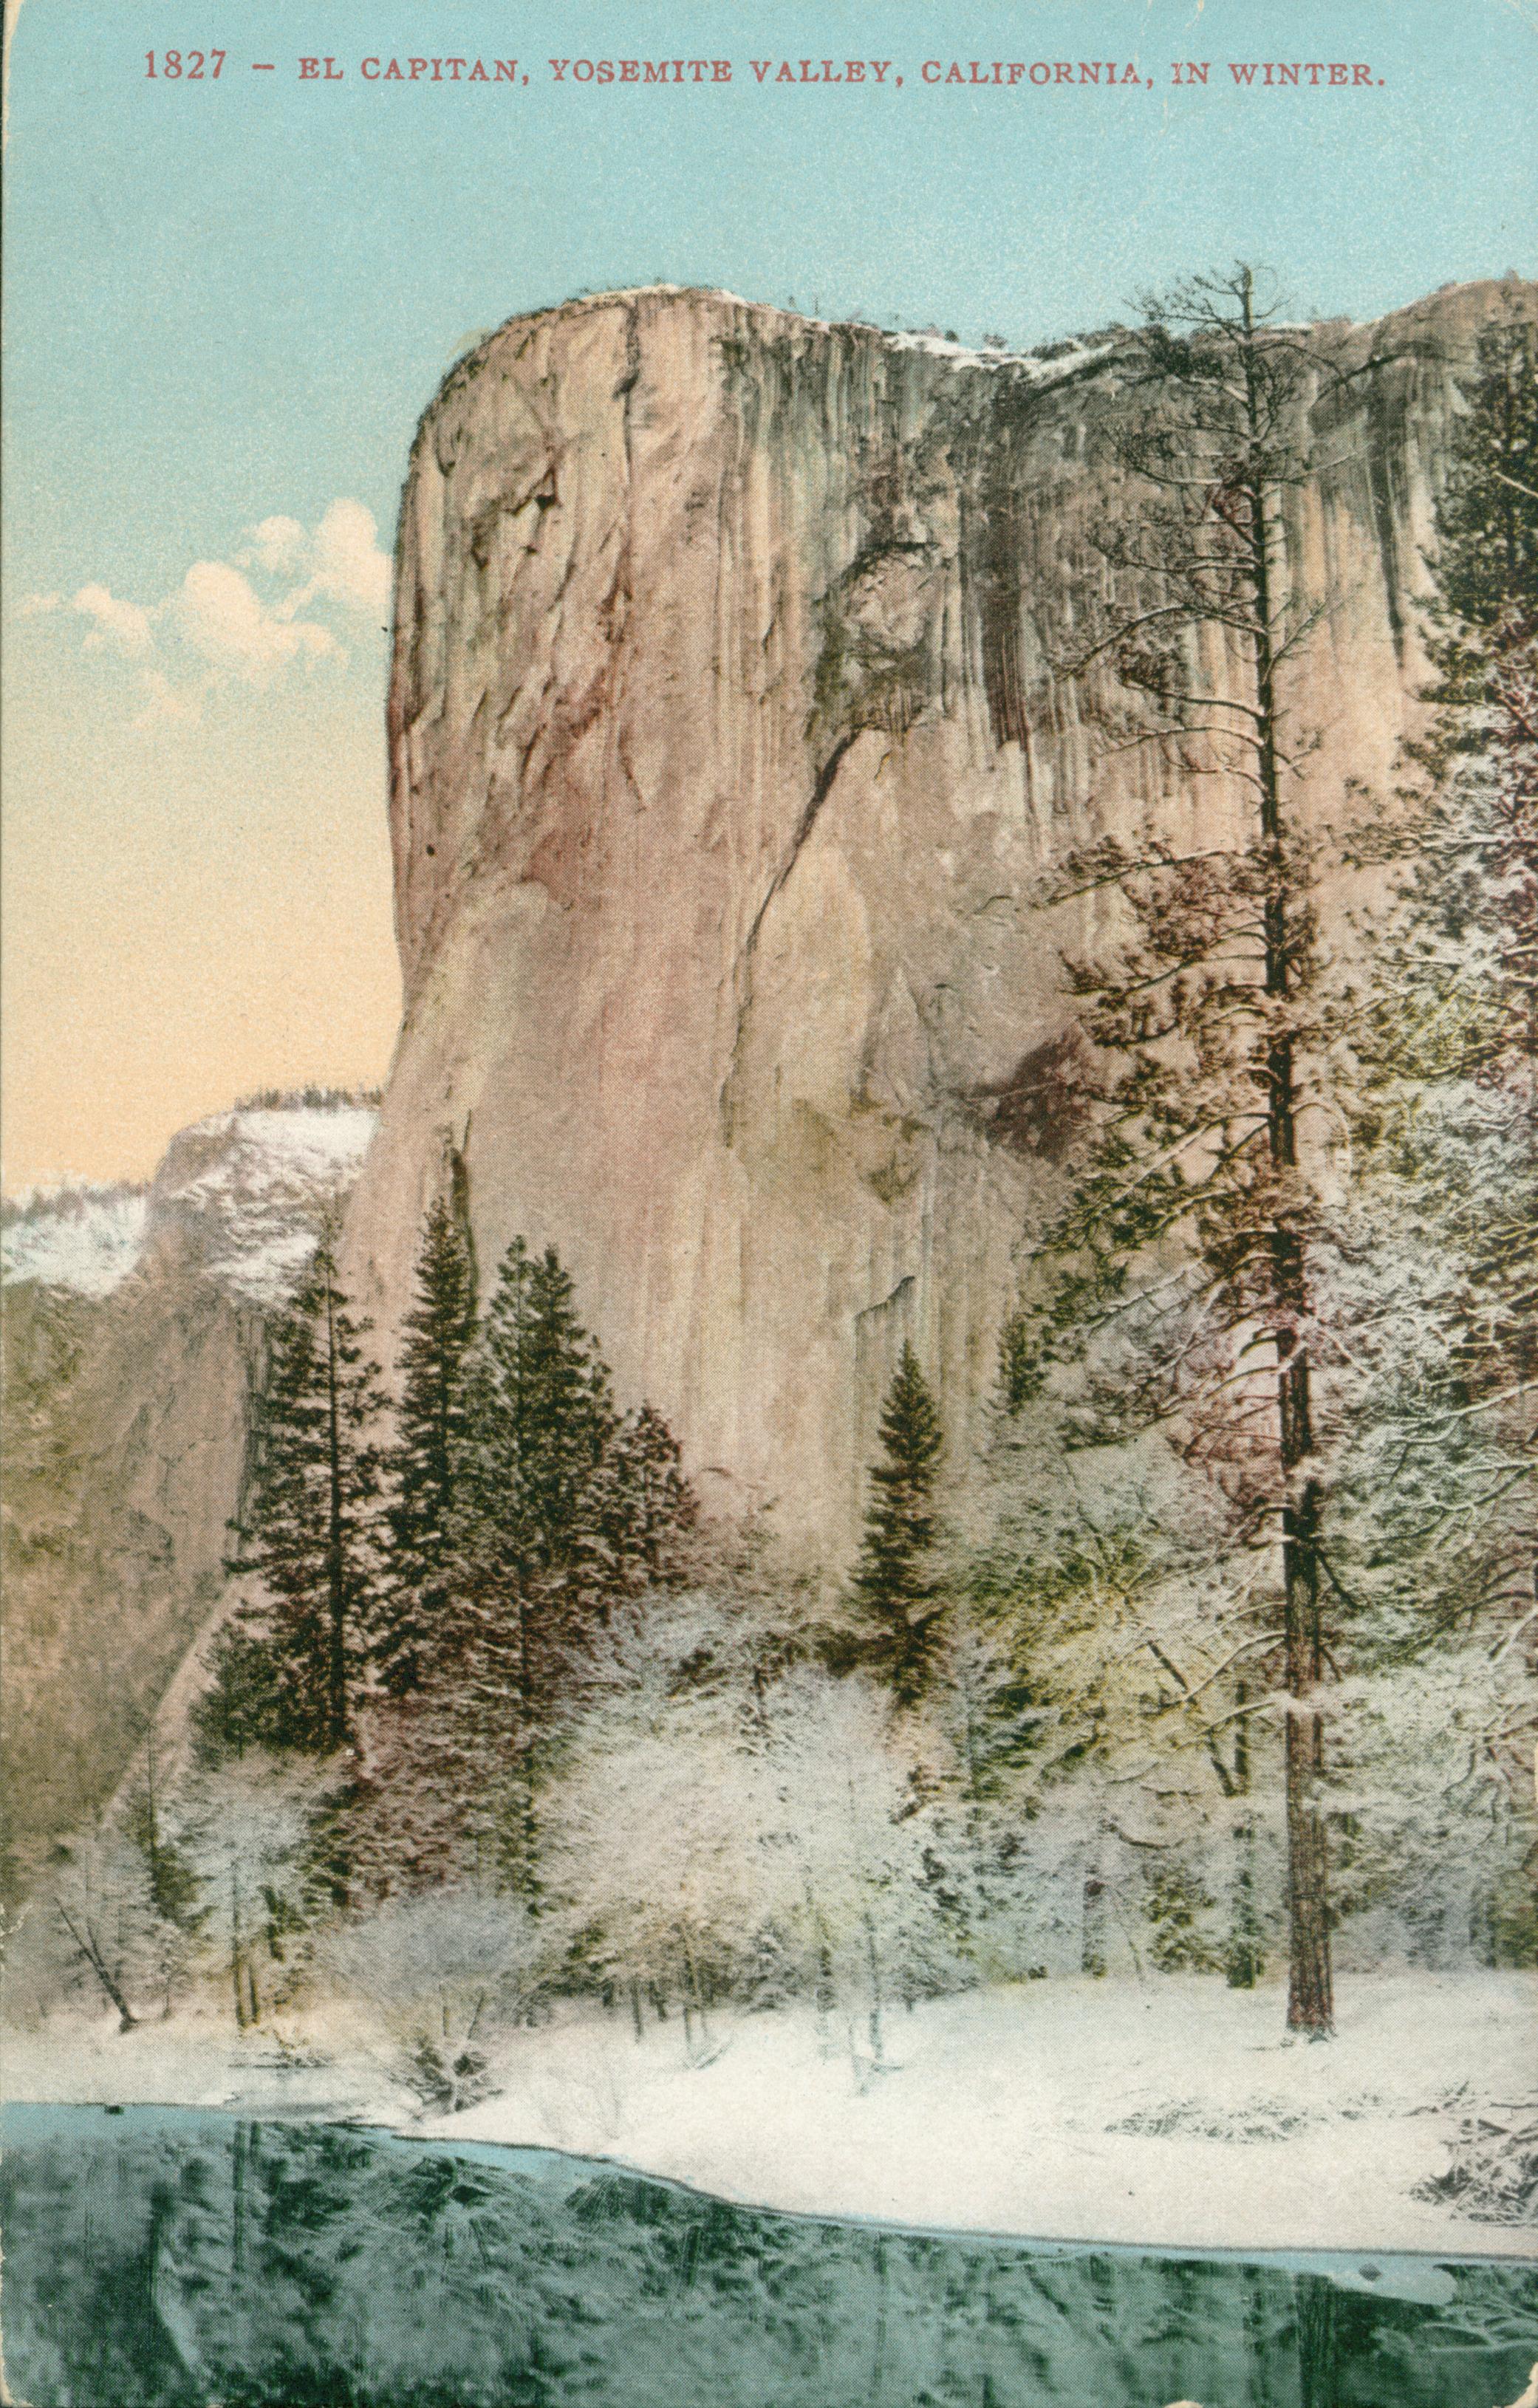 Shows El Capitan looming above a tree-lined river, the ground and trees are covered in snow